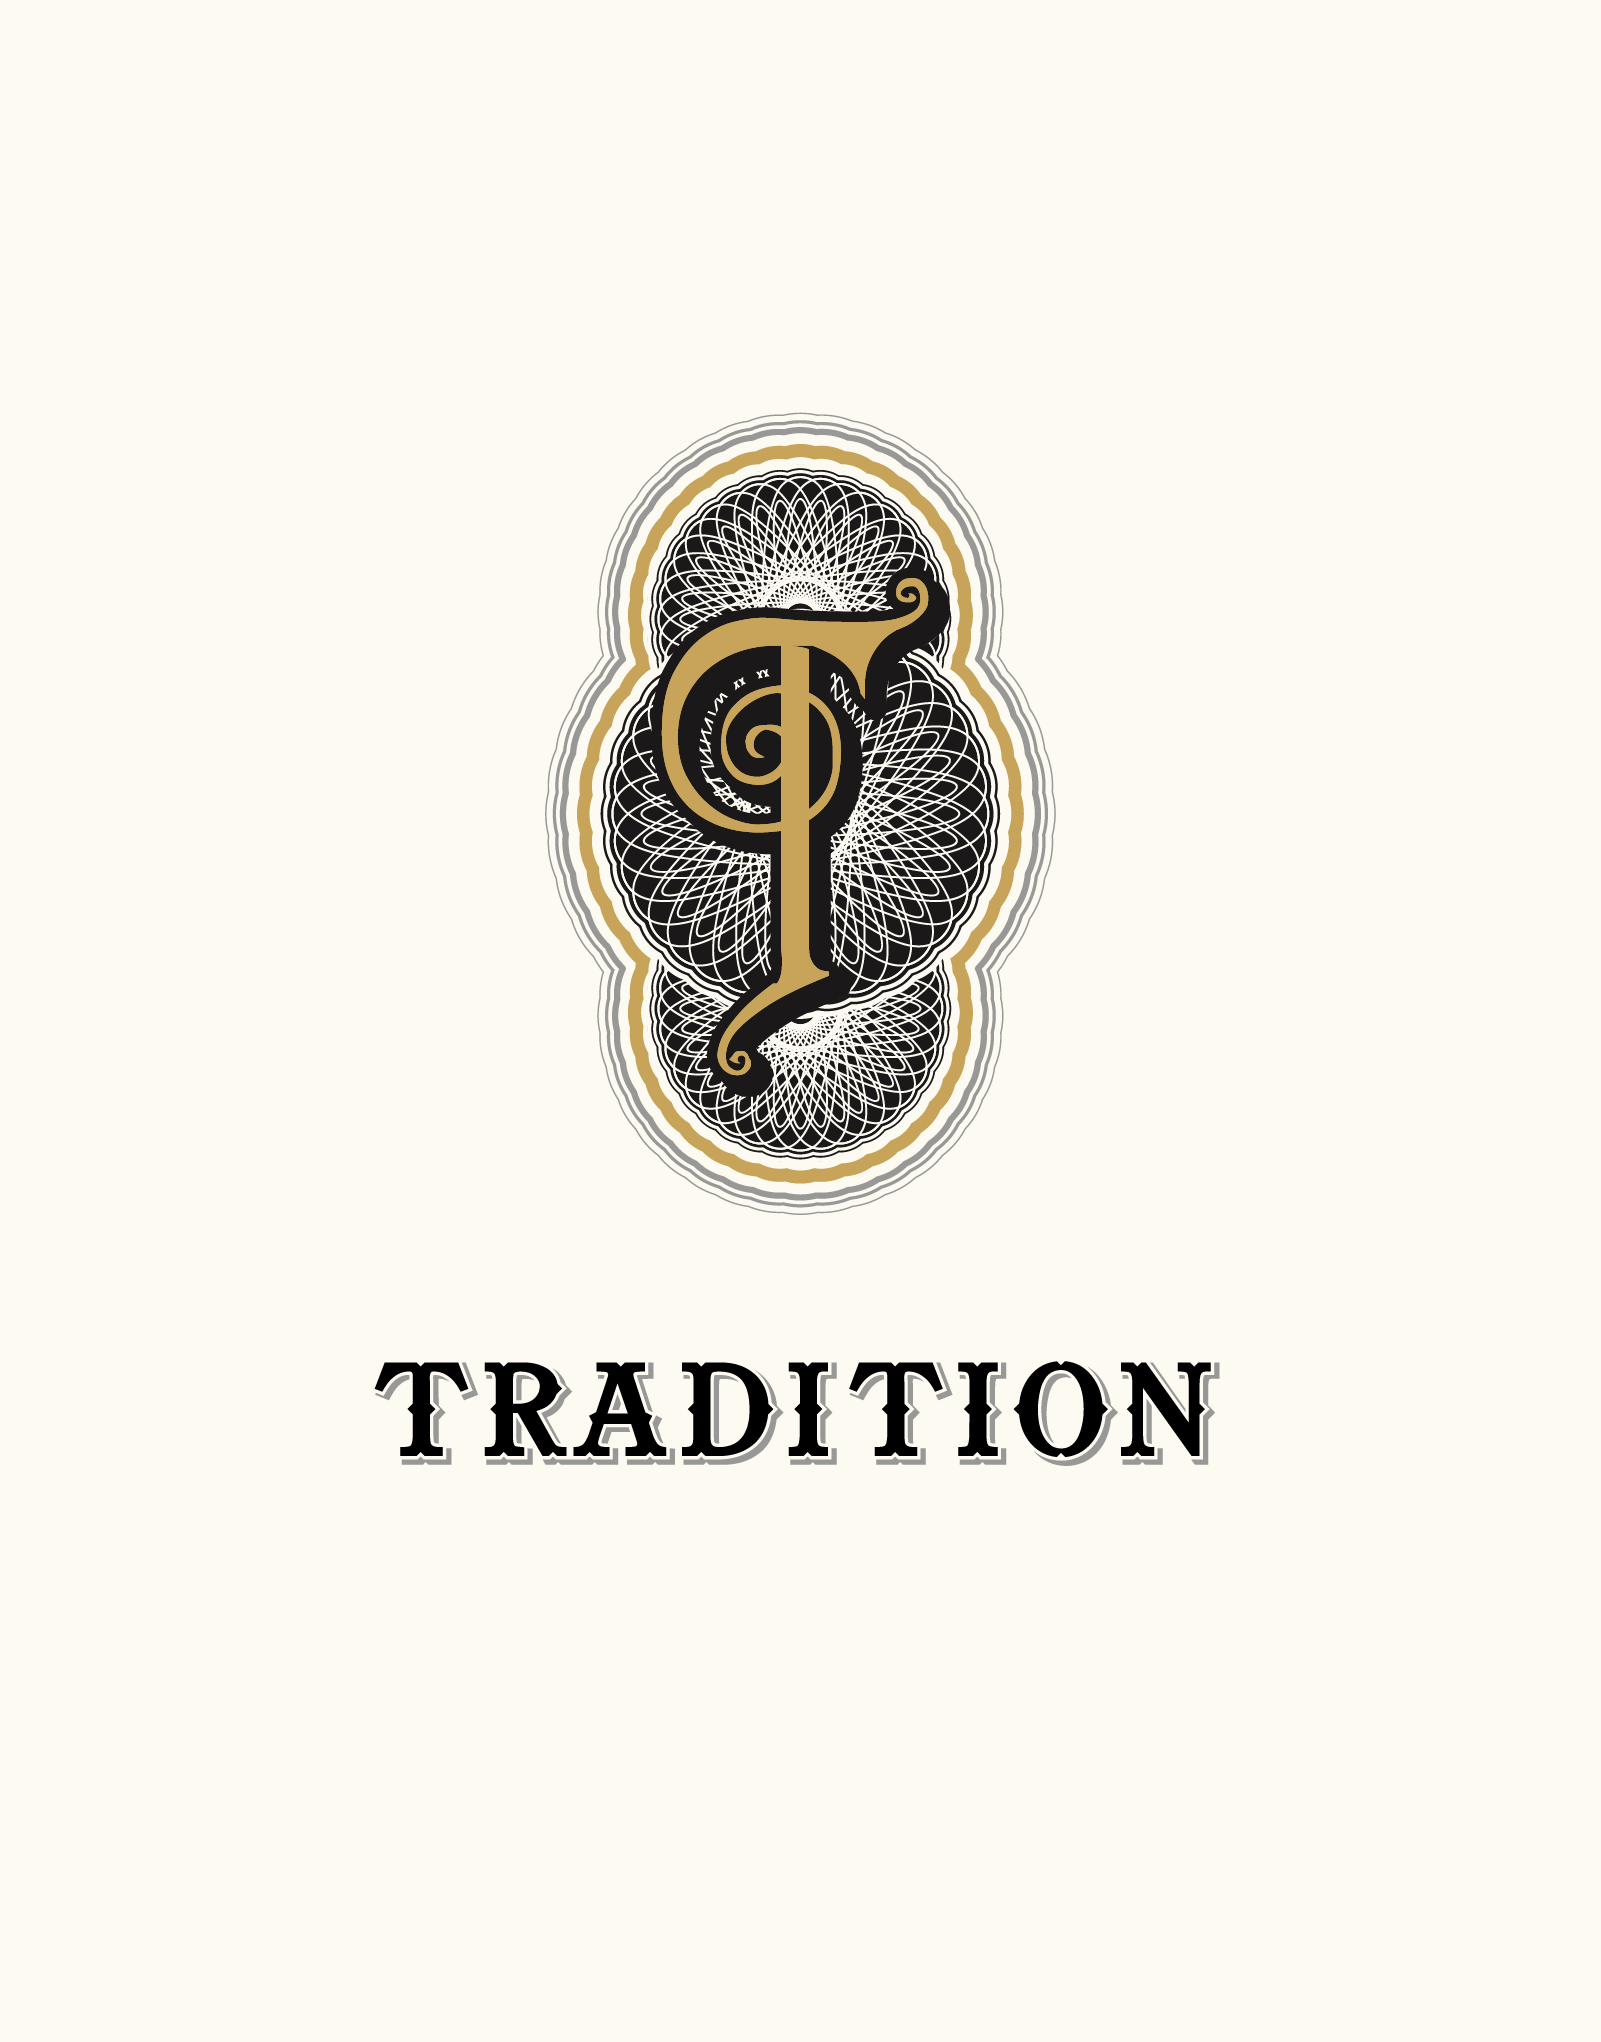 Tradition Lock Up logo design by logo designer CF Napa Brand Design for your inspiration and for the worlds largest logo competition